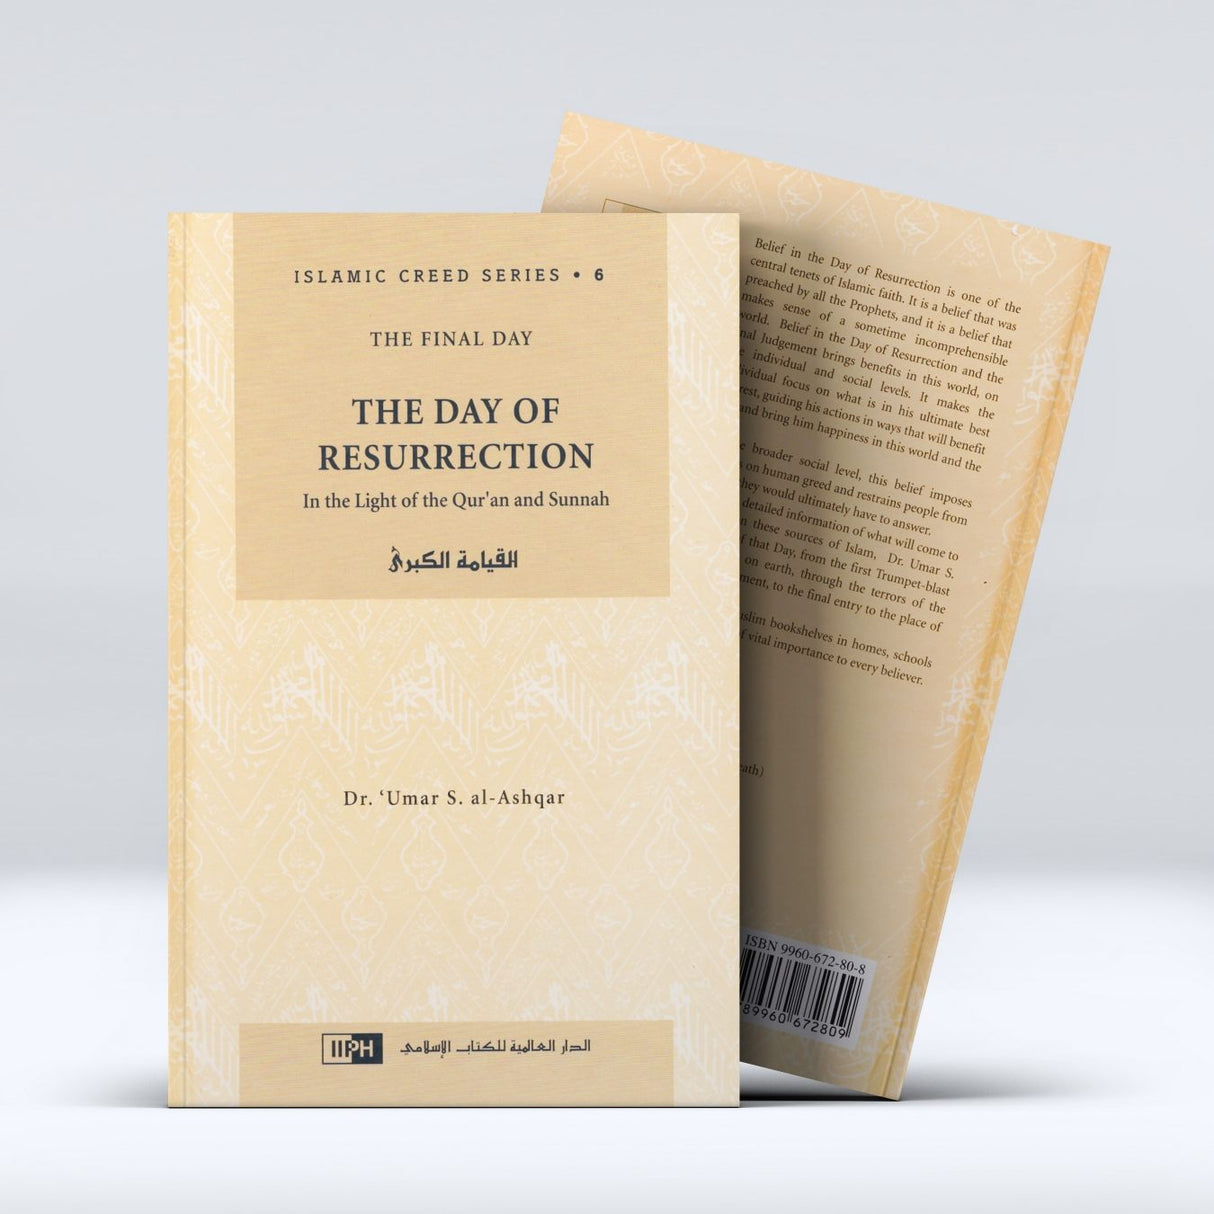 Islamic Creed Series Vol. 6 - The Day of Resurrection: In The Light of The Qur'an And Sunnah